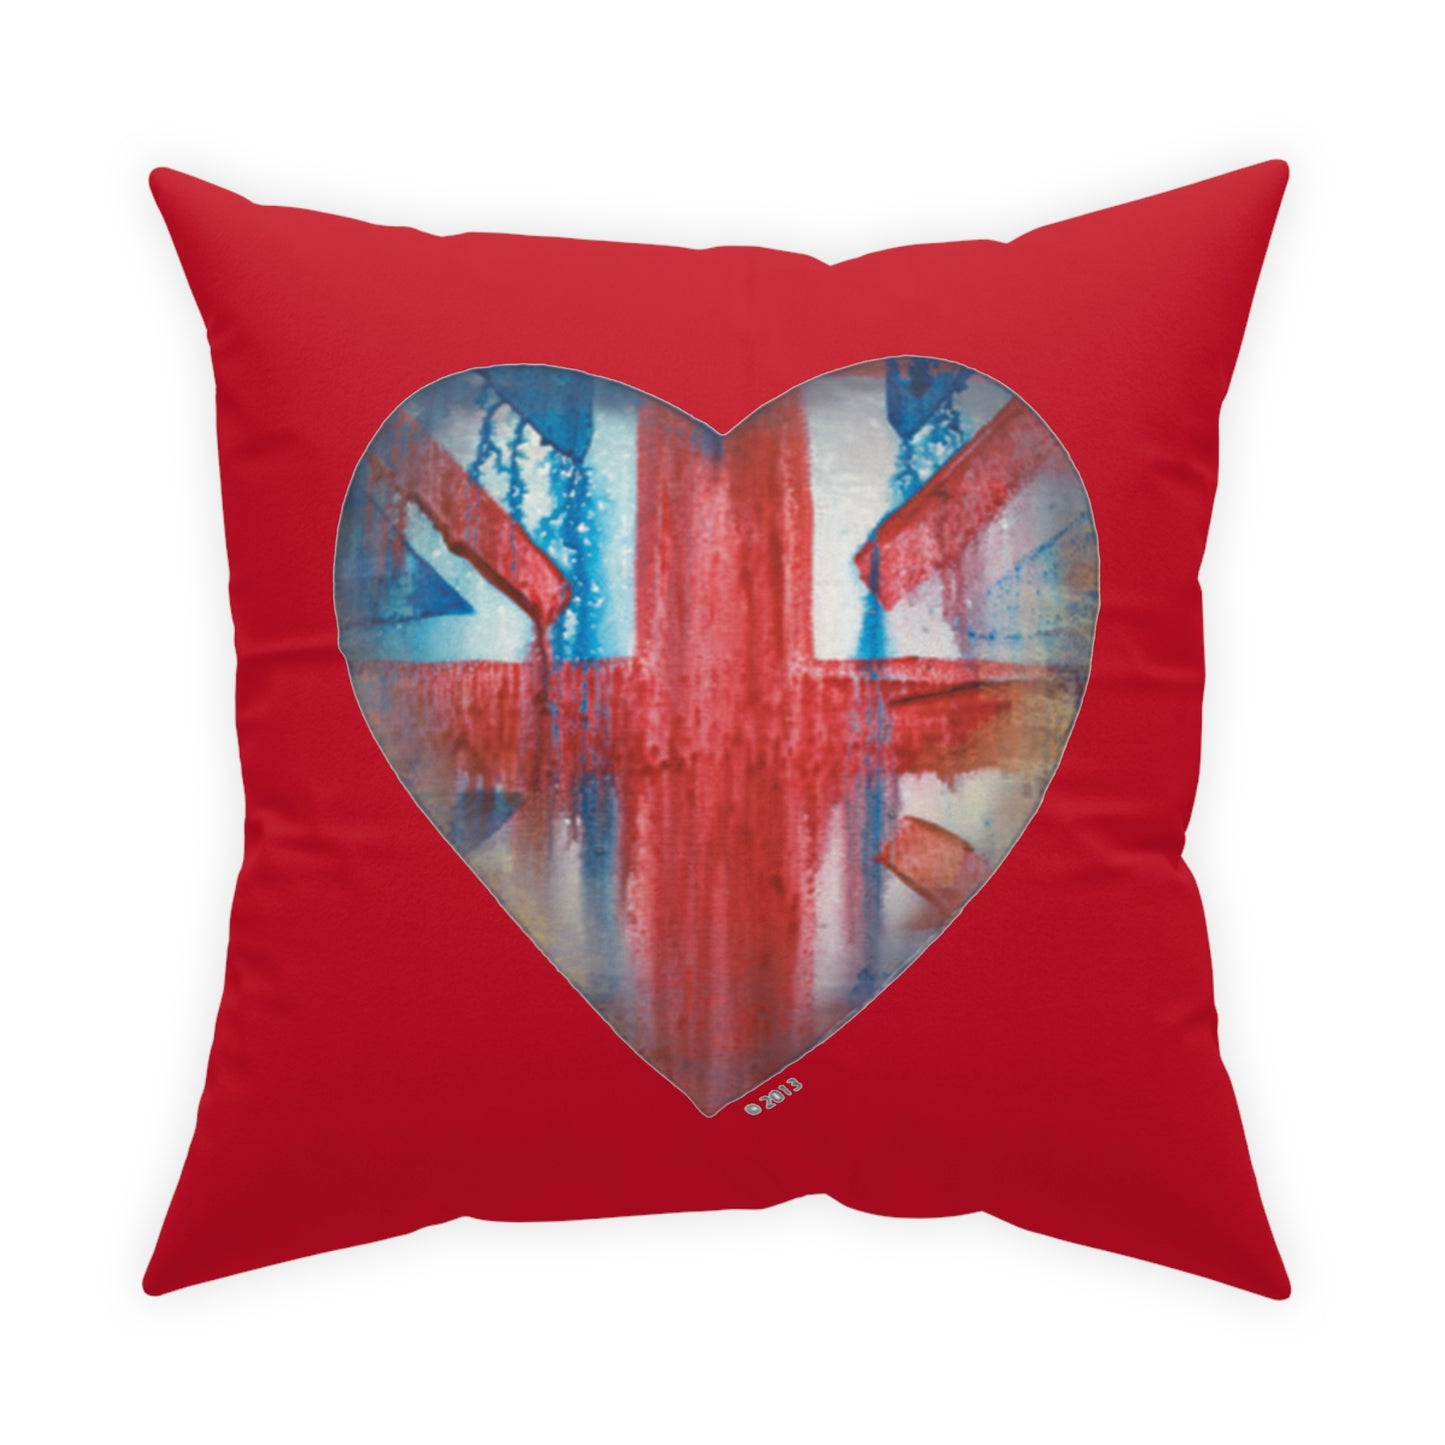 Red Throw Pillow -Colorful Throw pillow for couch - Union Jack decorative pillow for bed - Heart throw Pillow